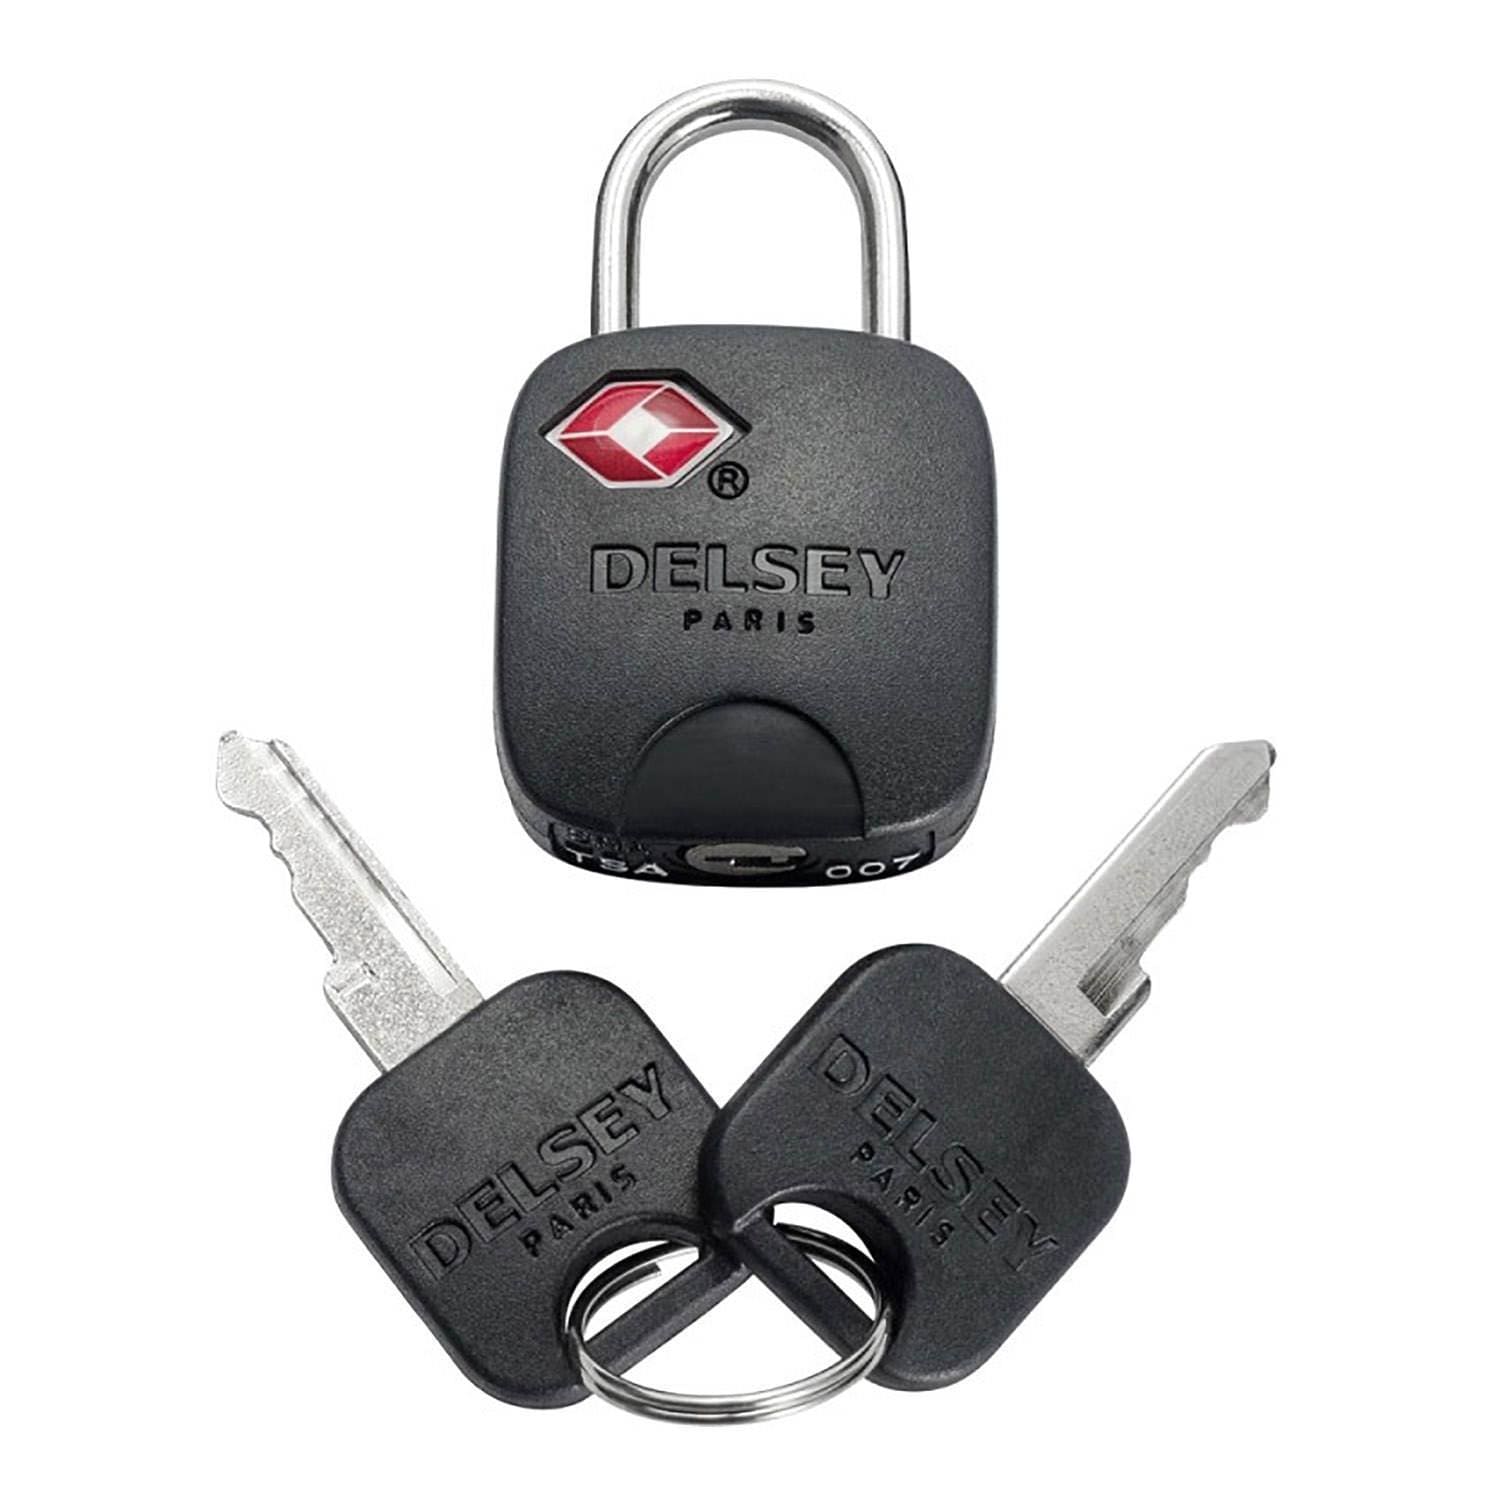 Delsey Travel Necessities 2016 Special for the USA TSA Key Padlock - 3940061 - Jashanmal Home